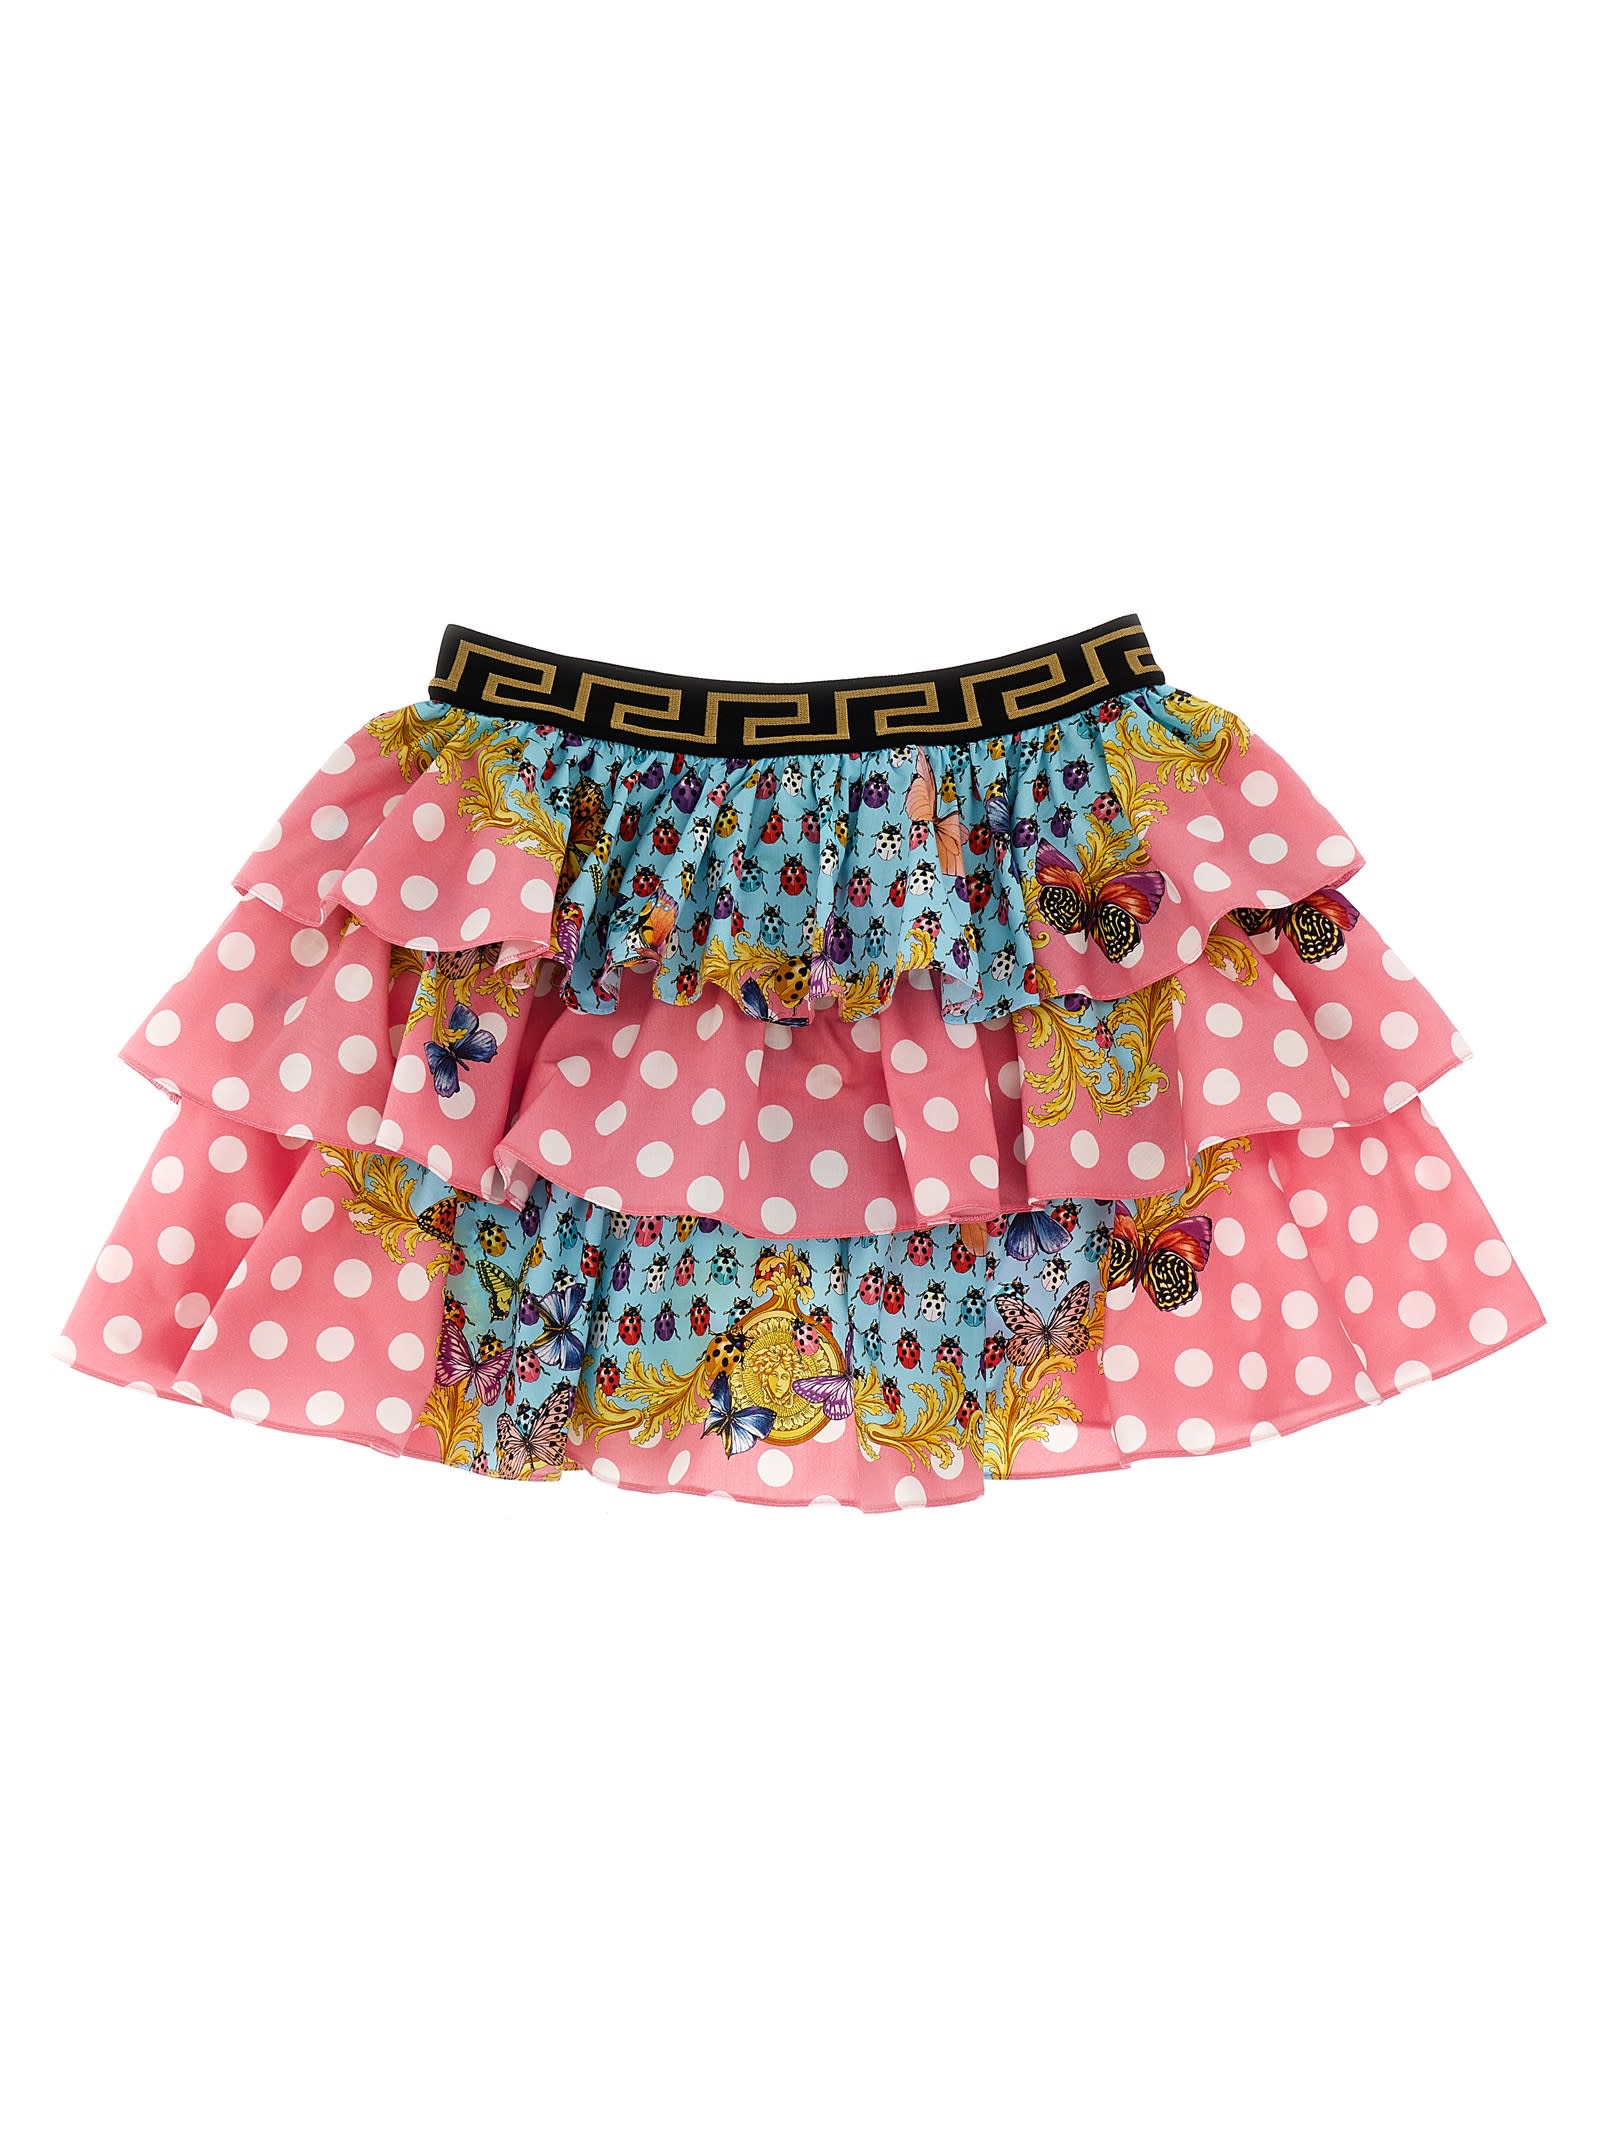 Versace Heritage Butterflies & Ladybugs Kids Skirt With The Vacation Capsule